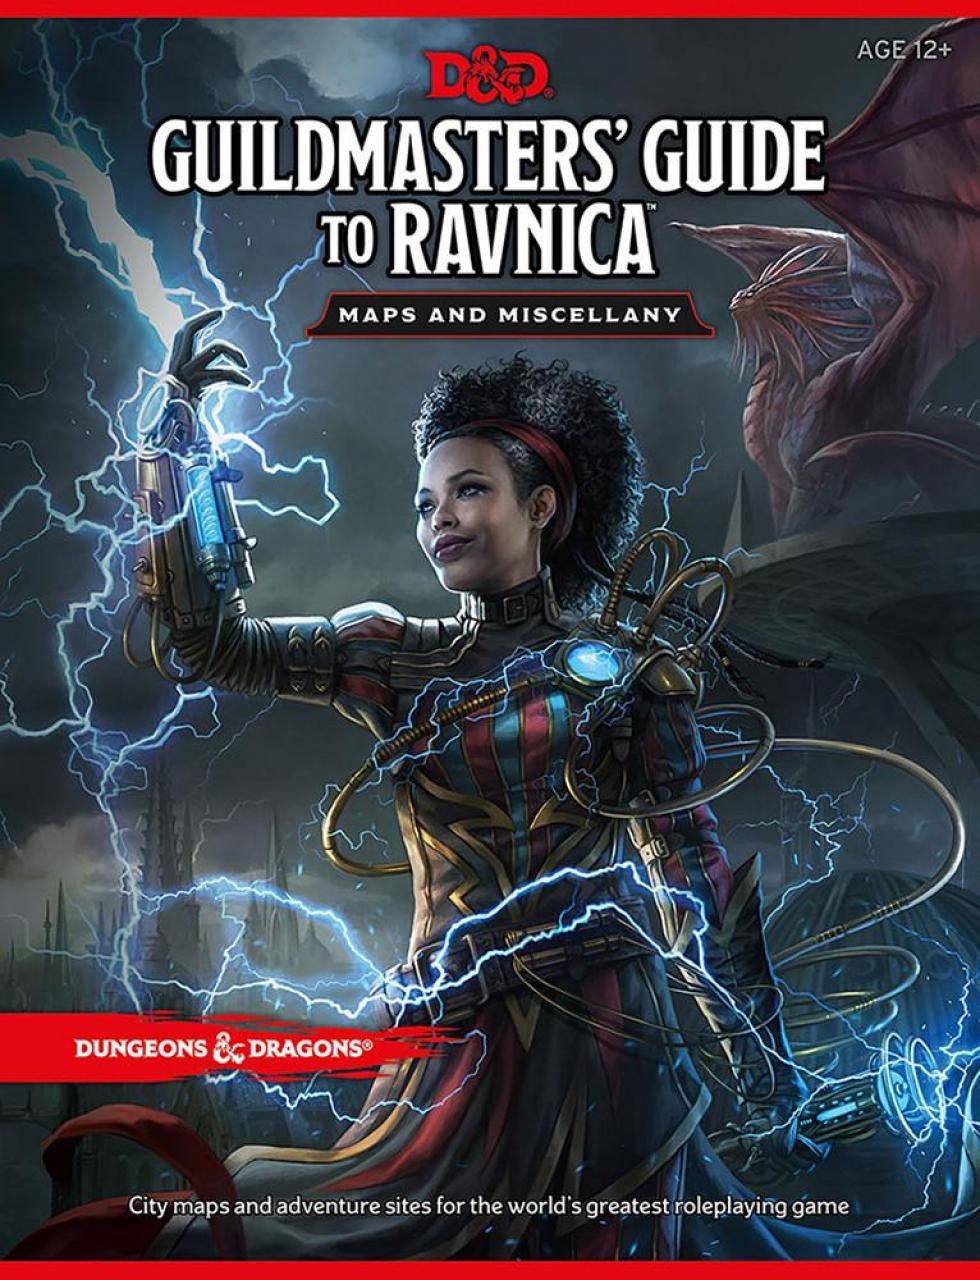 Wizards of the Coast Spiel, D&D - RPG Guildmasters Guide to Ravnica - Maps & Miscellany